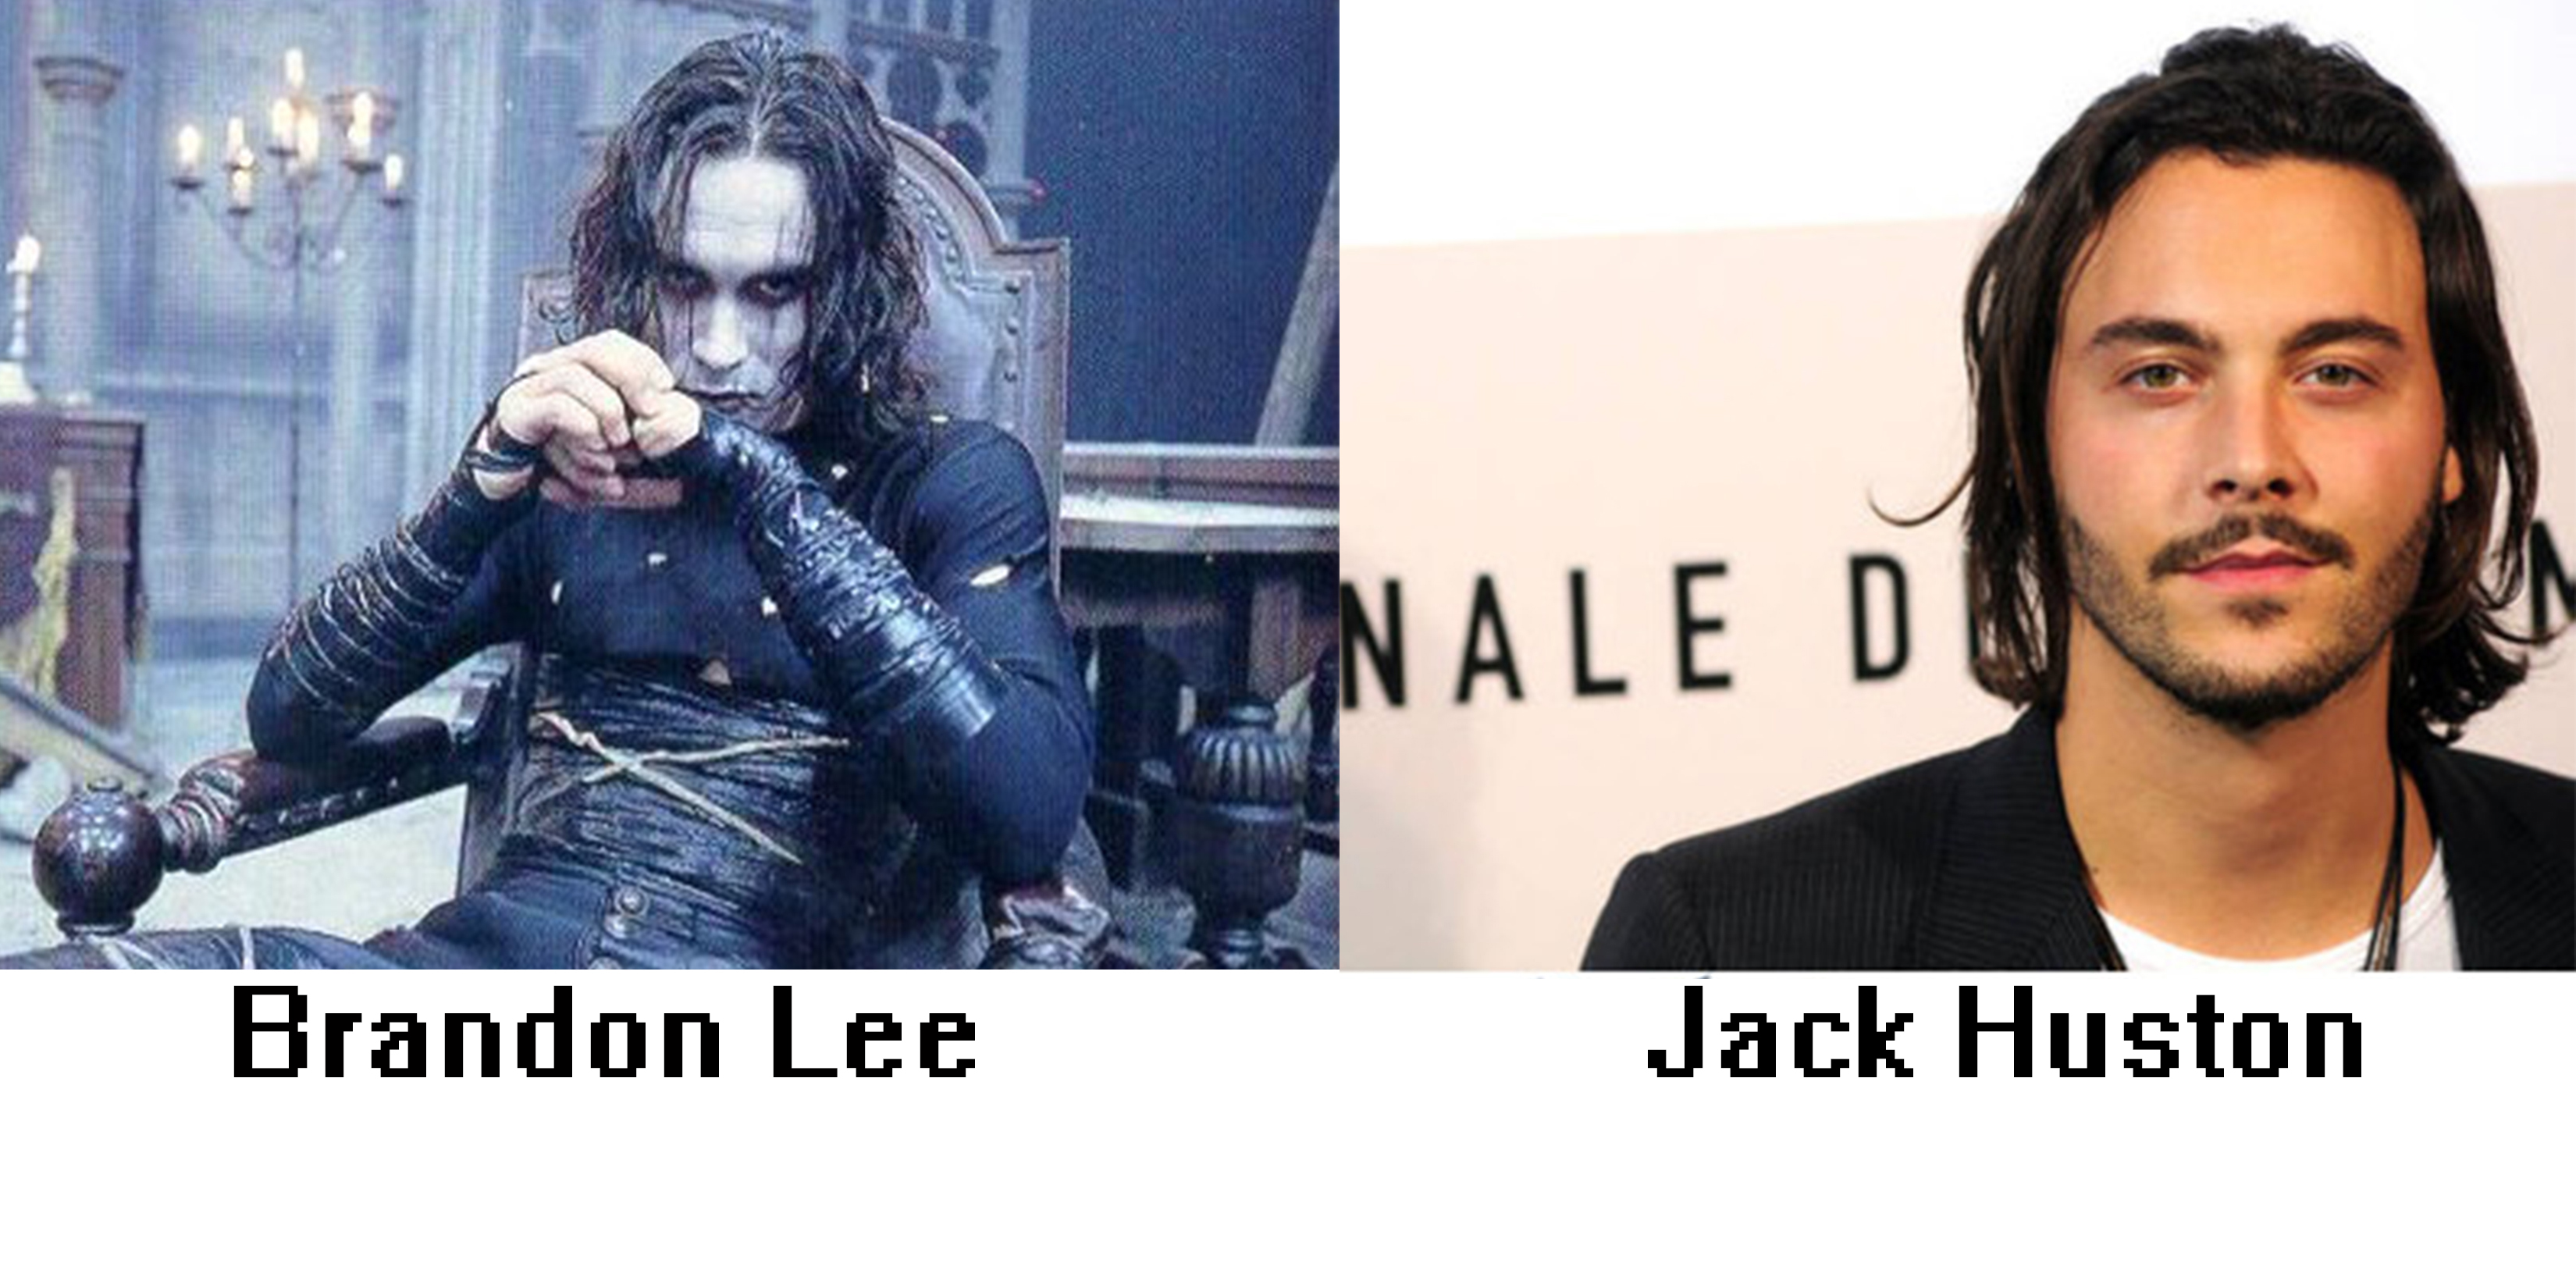 It looks like we have a lead for Corin Hardy's The Crow remake. Boardwalk Empire actor Jack Huston is going to play Eric Draven in the Relativity Studios produced film.  This just happened after Luke Evans dropped out for the role last minute!!